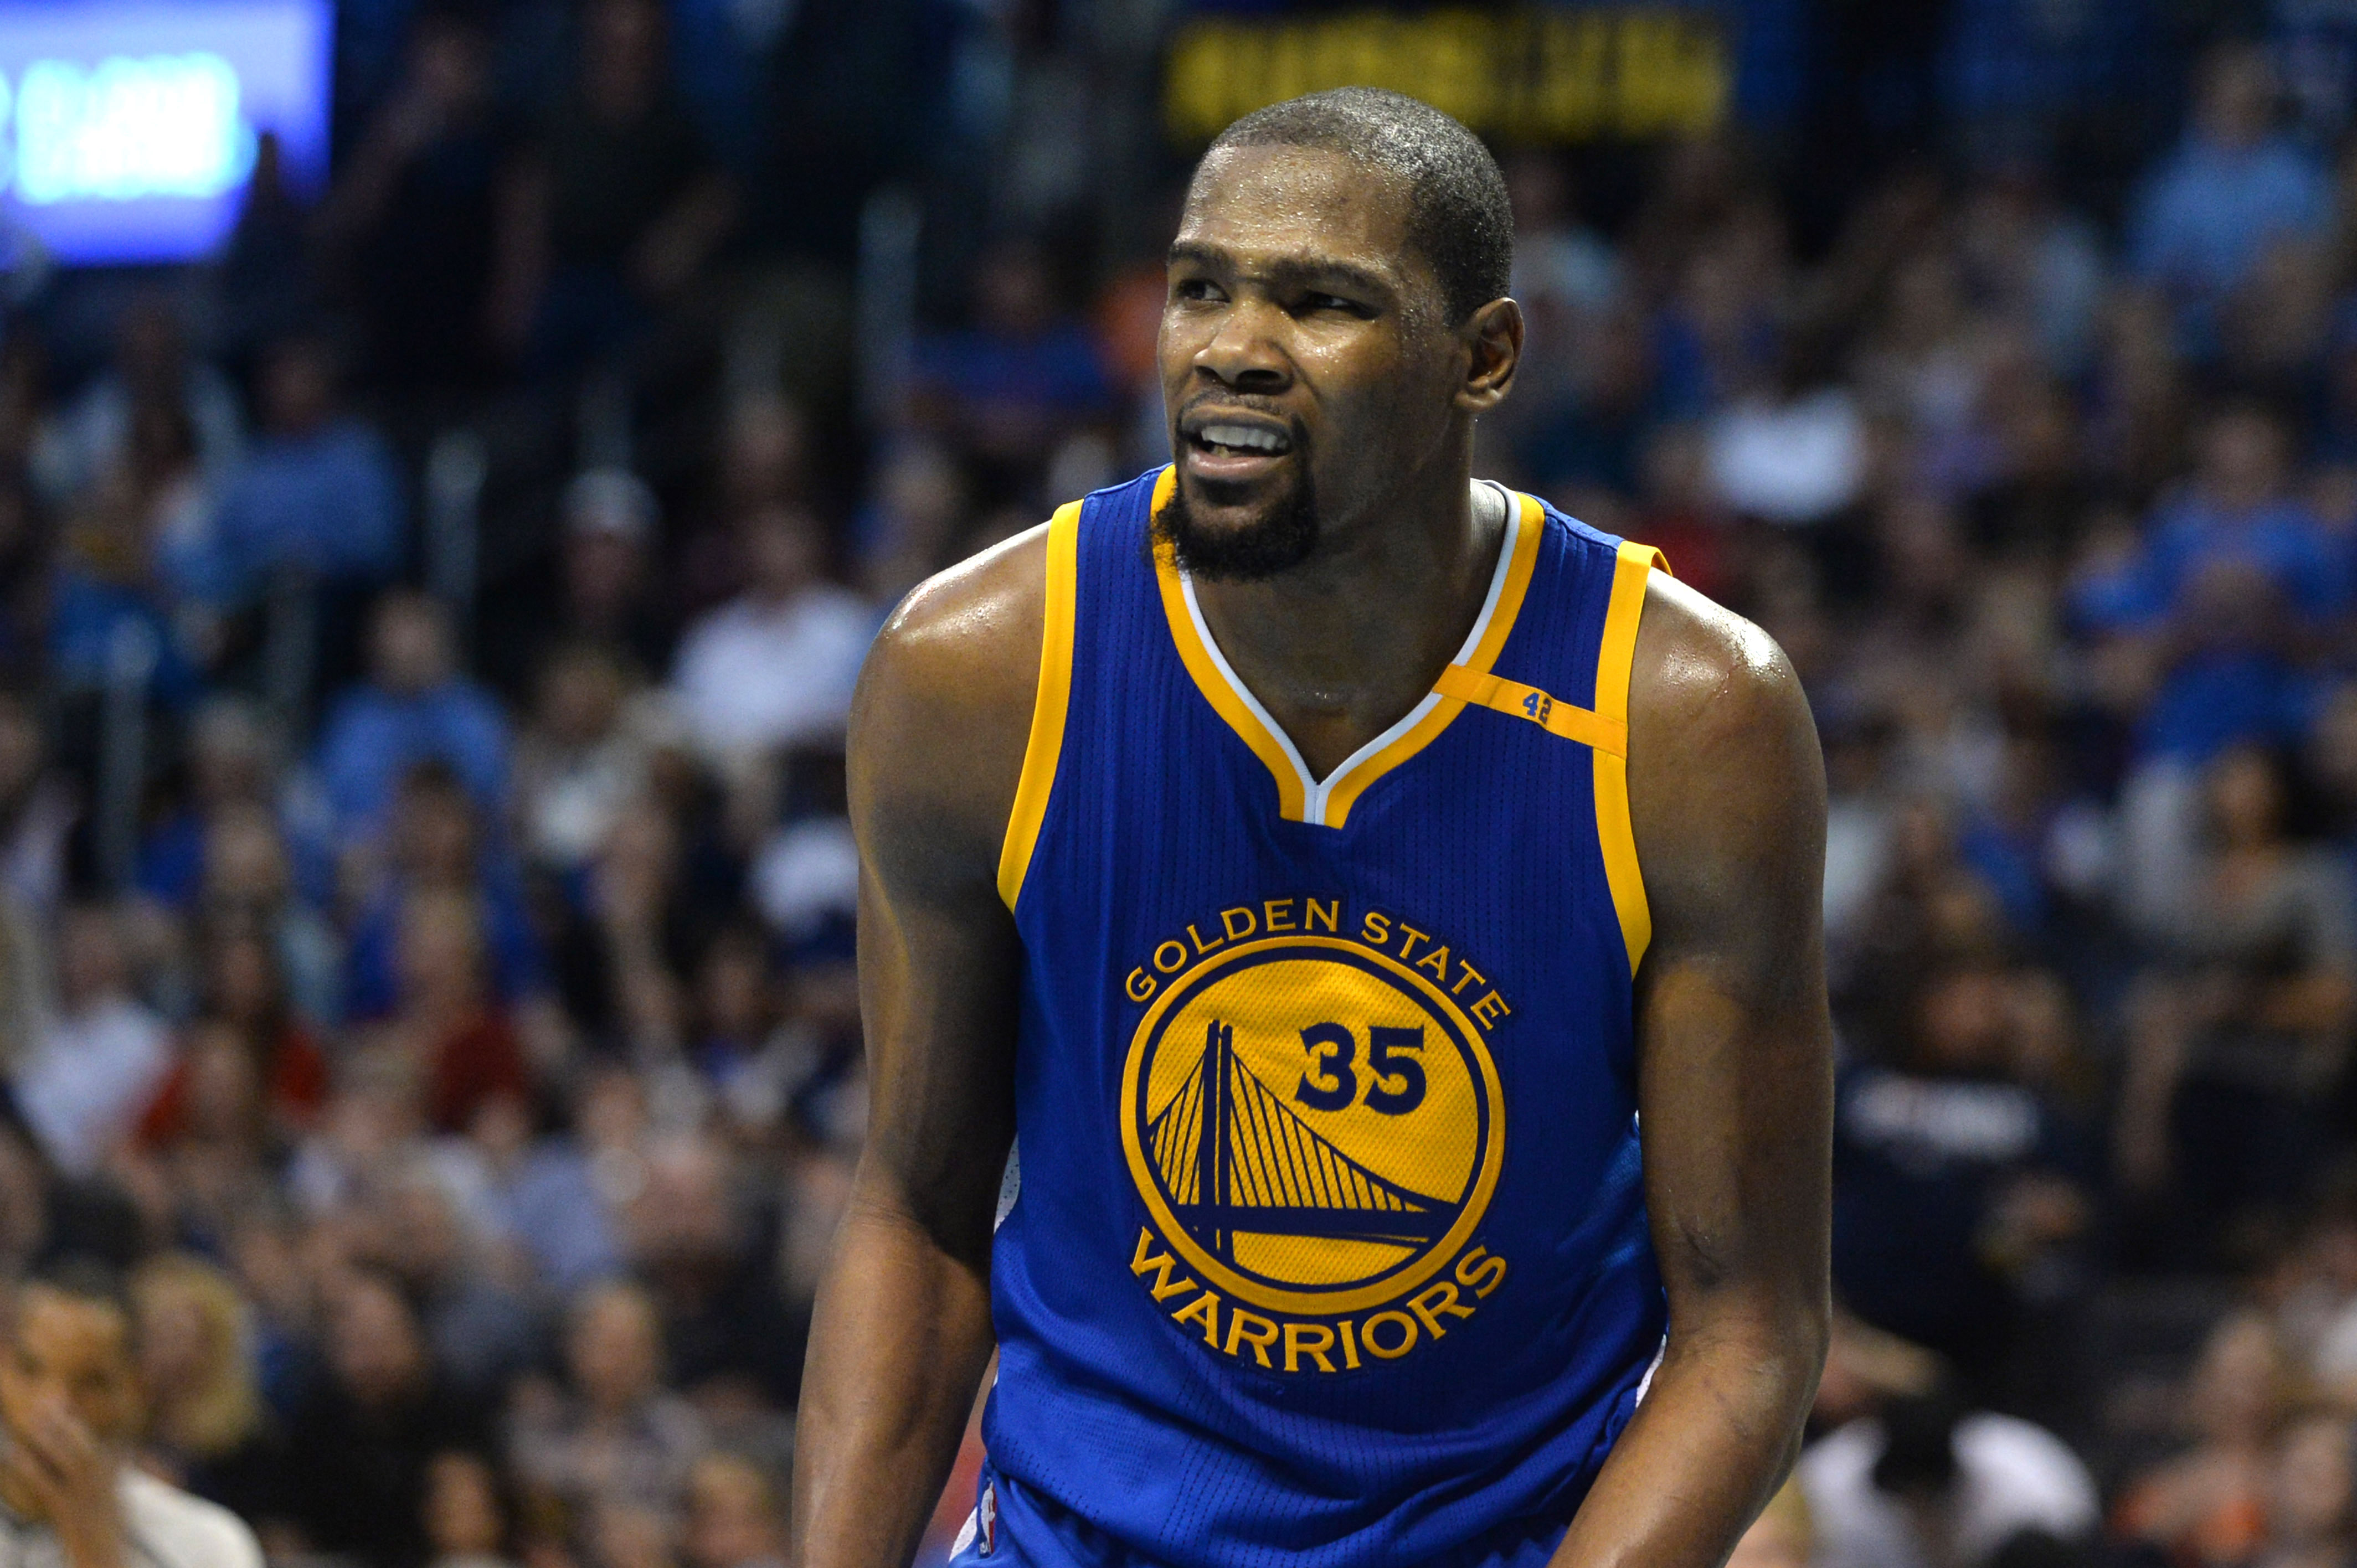 Golden State Warriors furious with Oklahoma City's treatment of Kevin Durant - FanSided